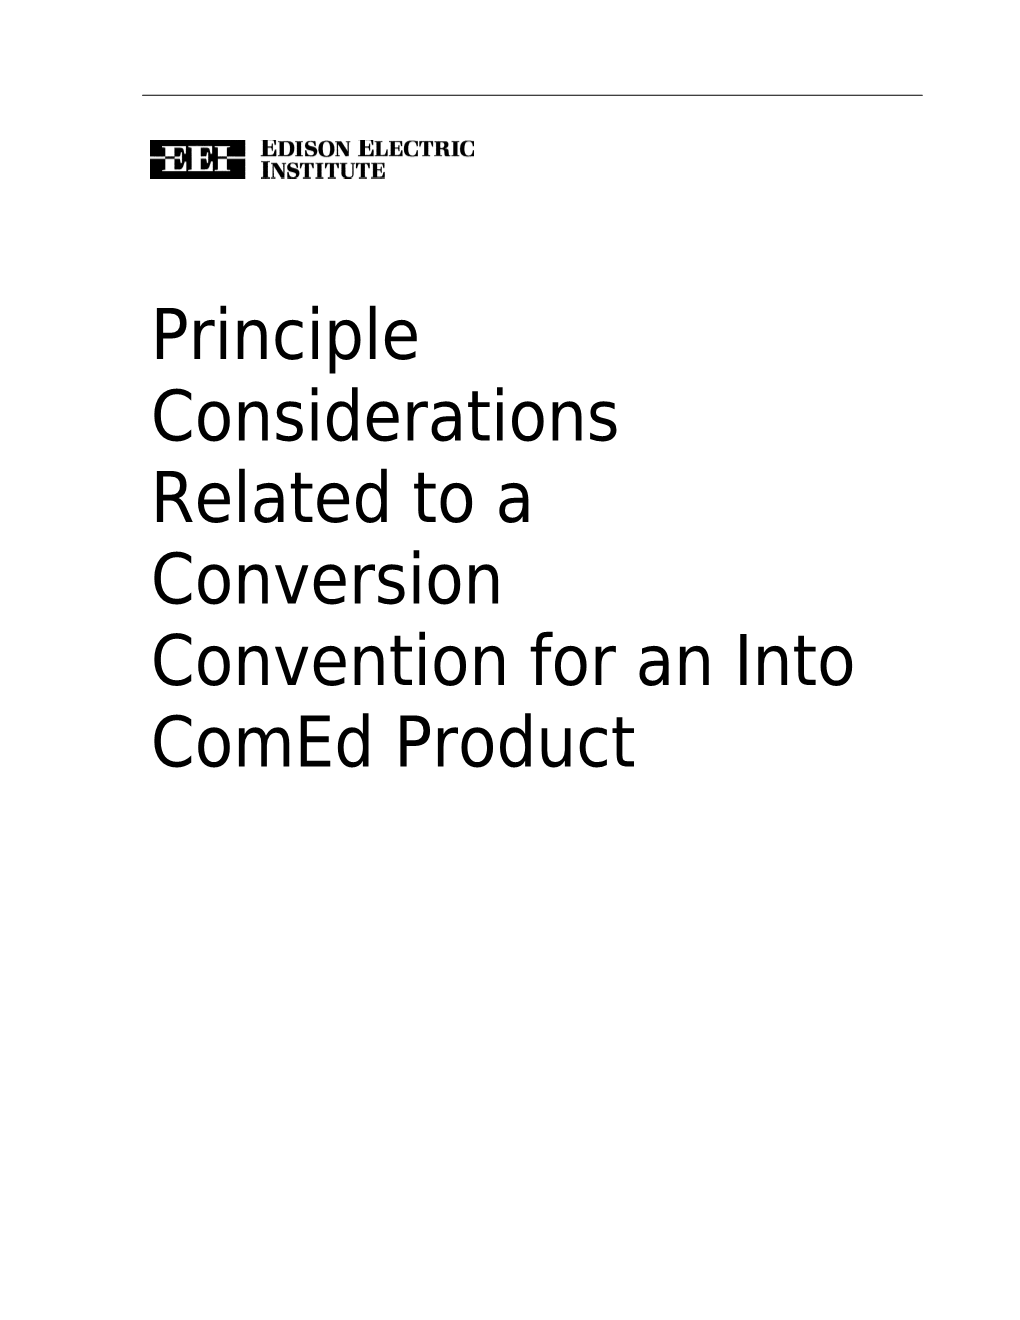 Principle Considerations Related to a Conversion Convention for an Into Comed Product